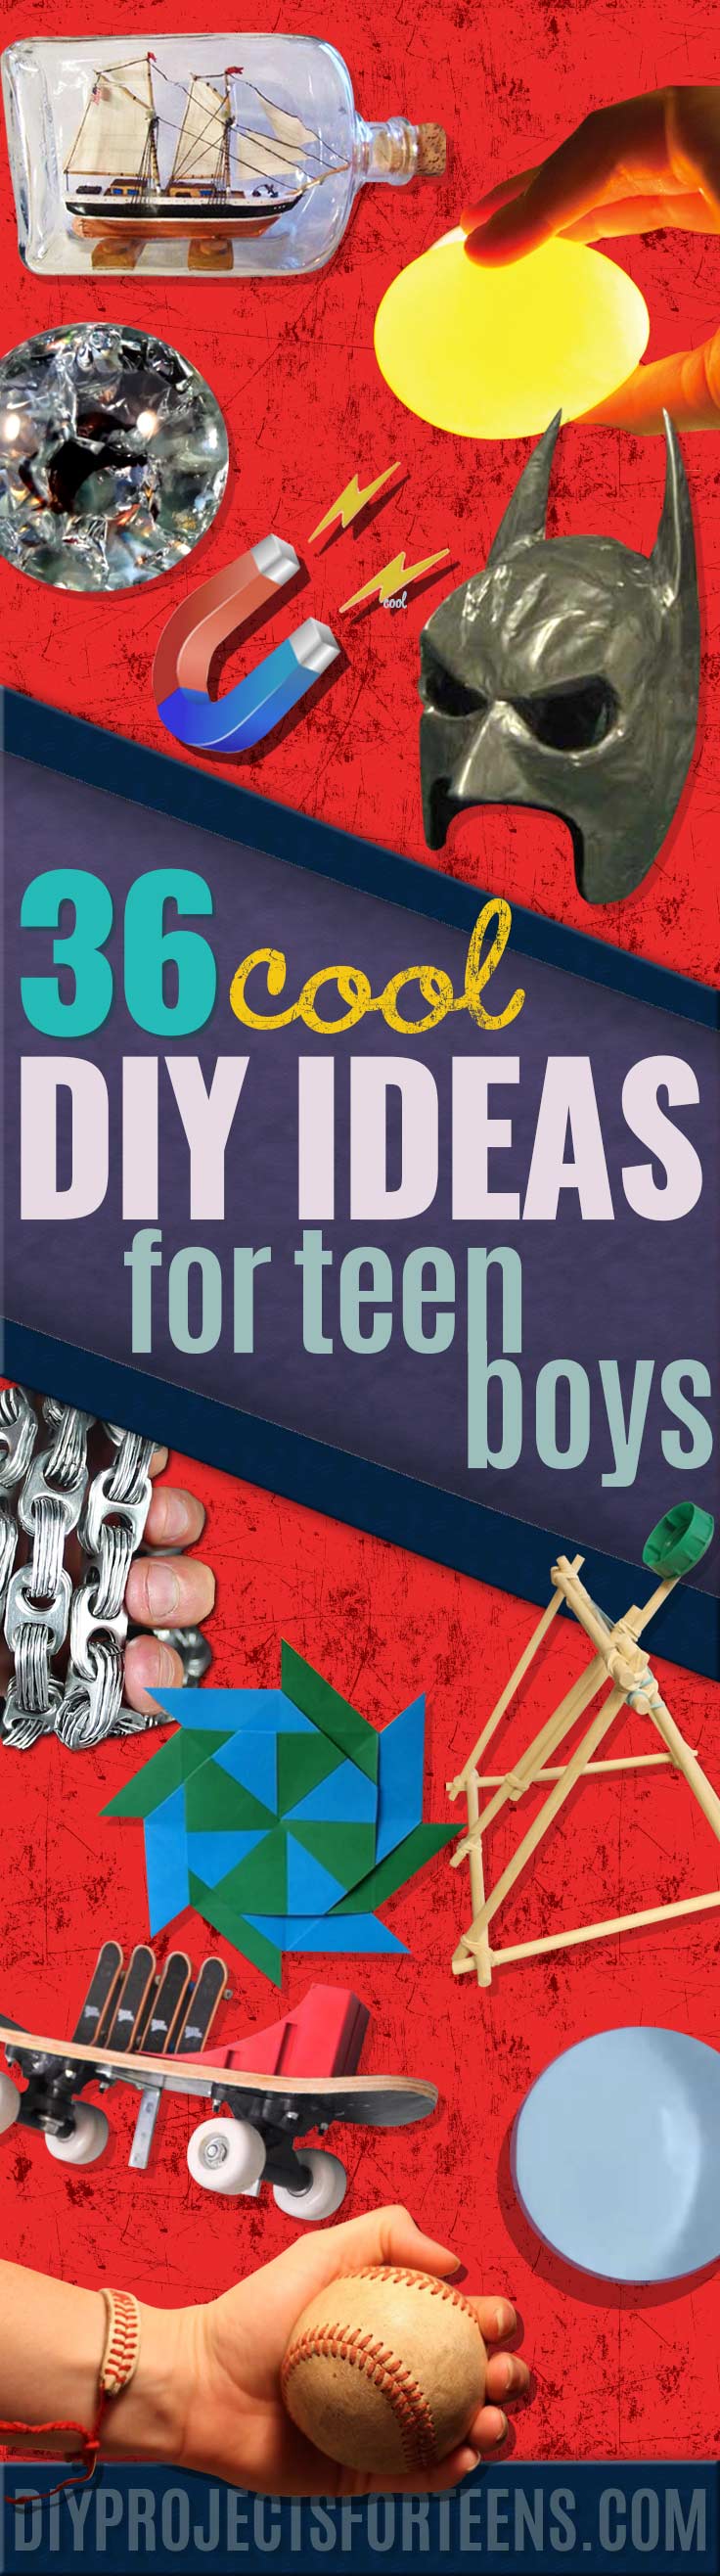 Cool Crafts for Teens Boys -Creative, Awesome Teen DIY Projects and Fun Creative Crafts for Boys (and even Girls) Tweens Can Make Fun Stuff At Home